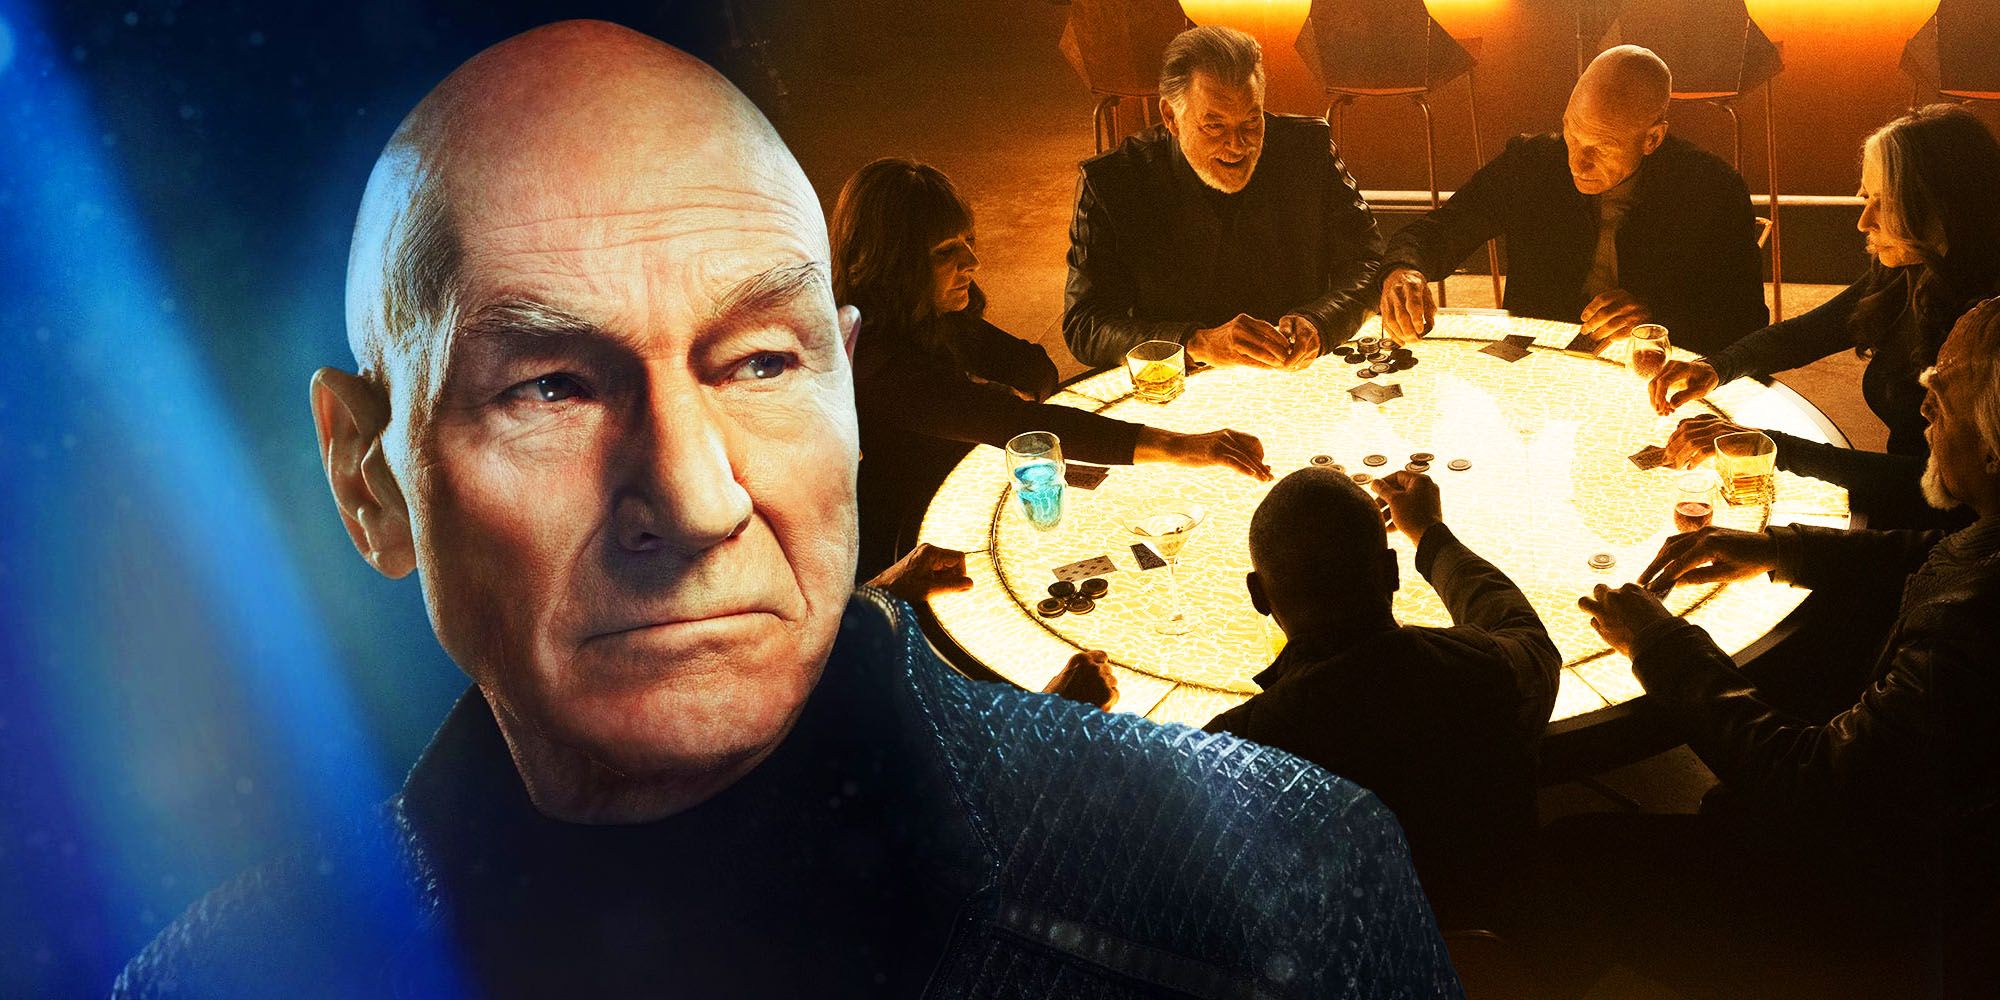 Admiral Picard and the Star Trek: TNG cast in Picard season 3.